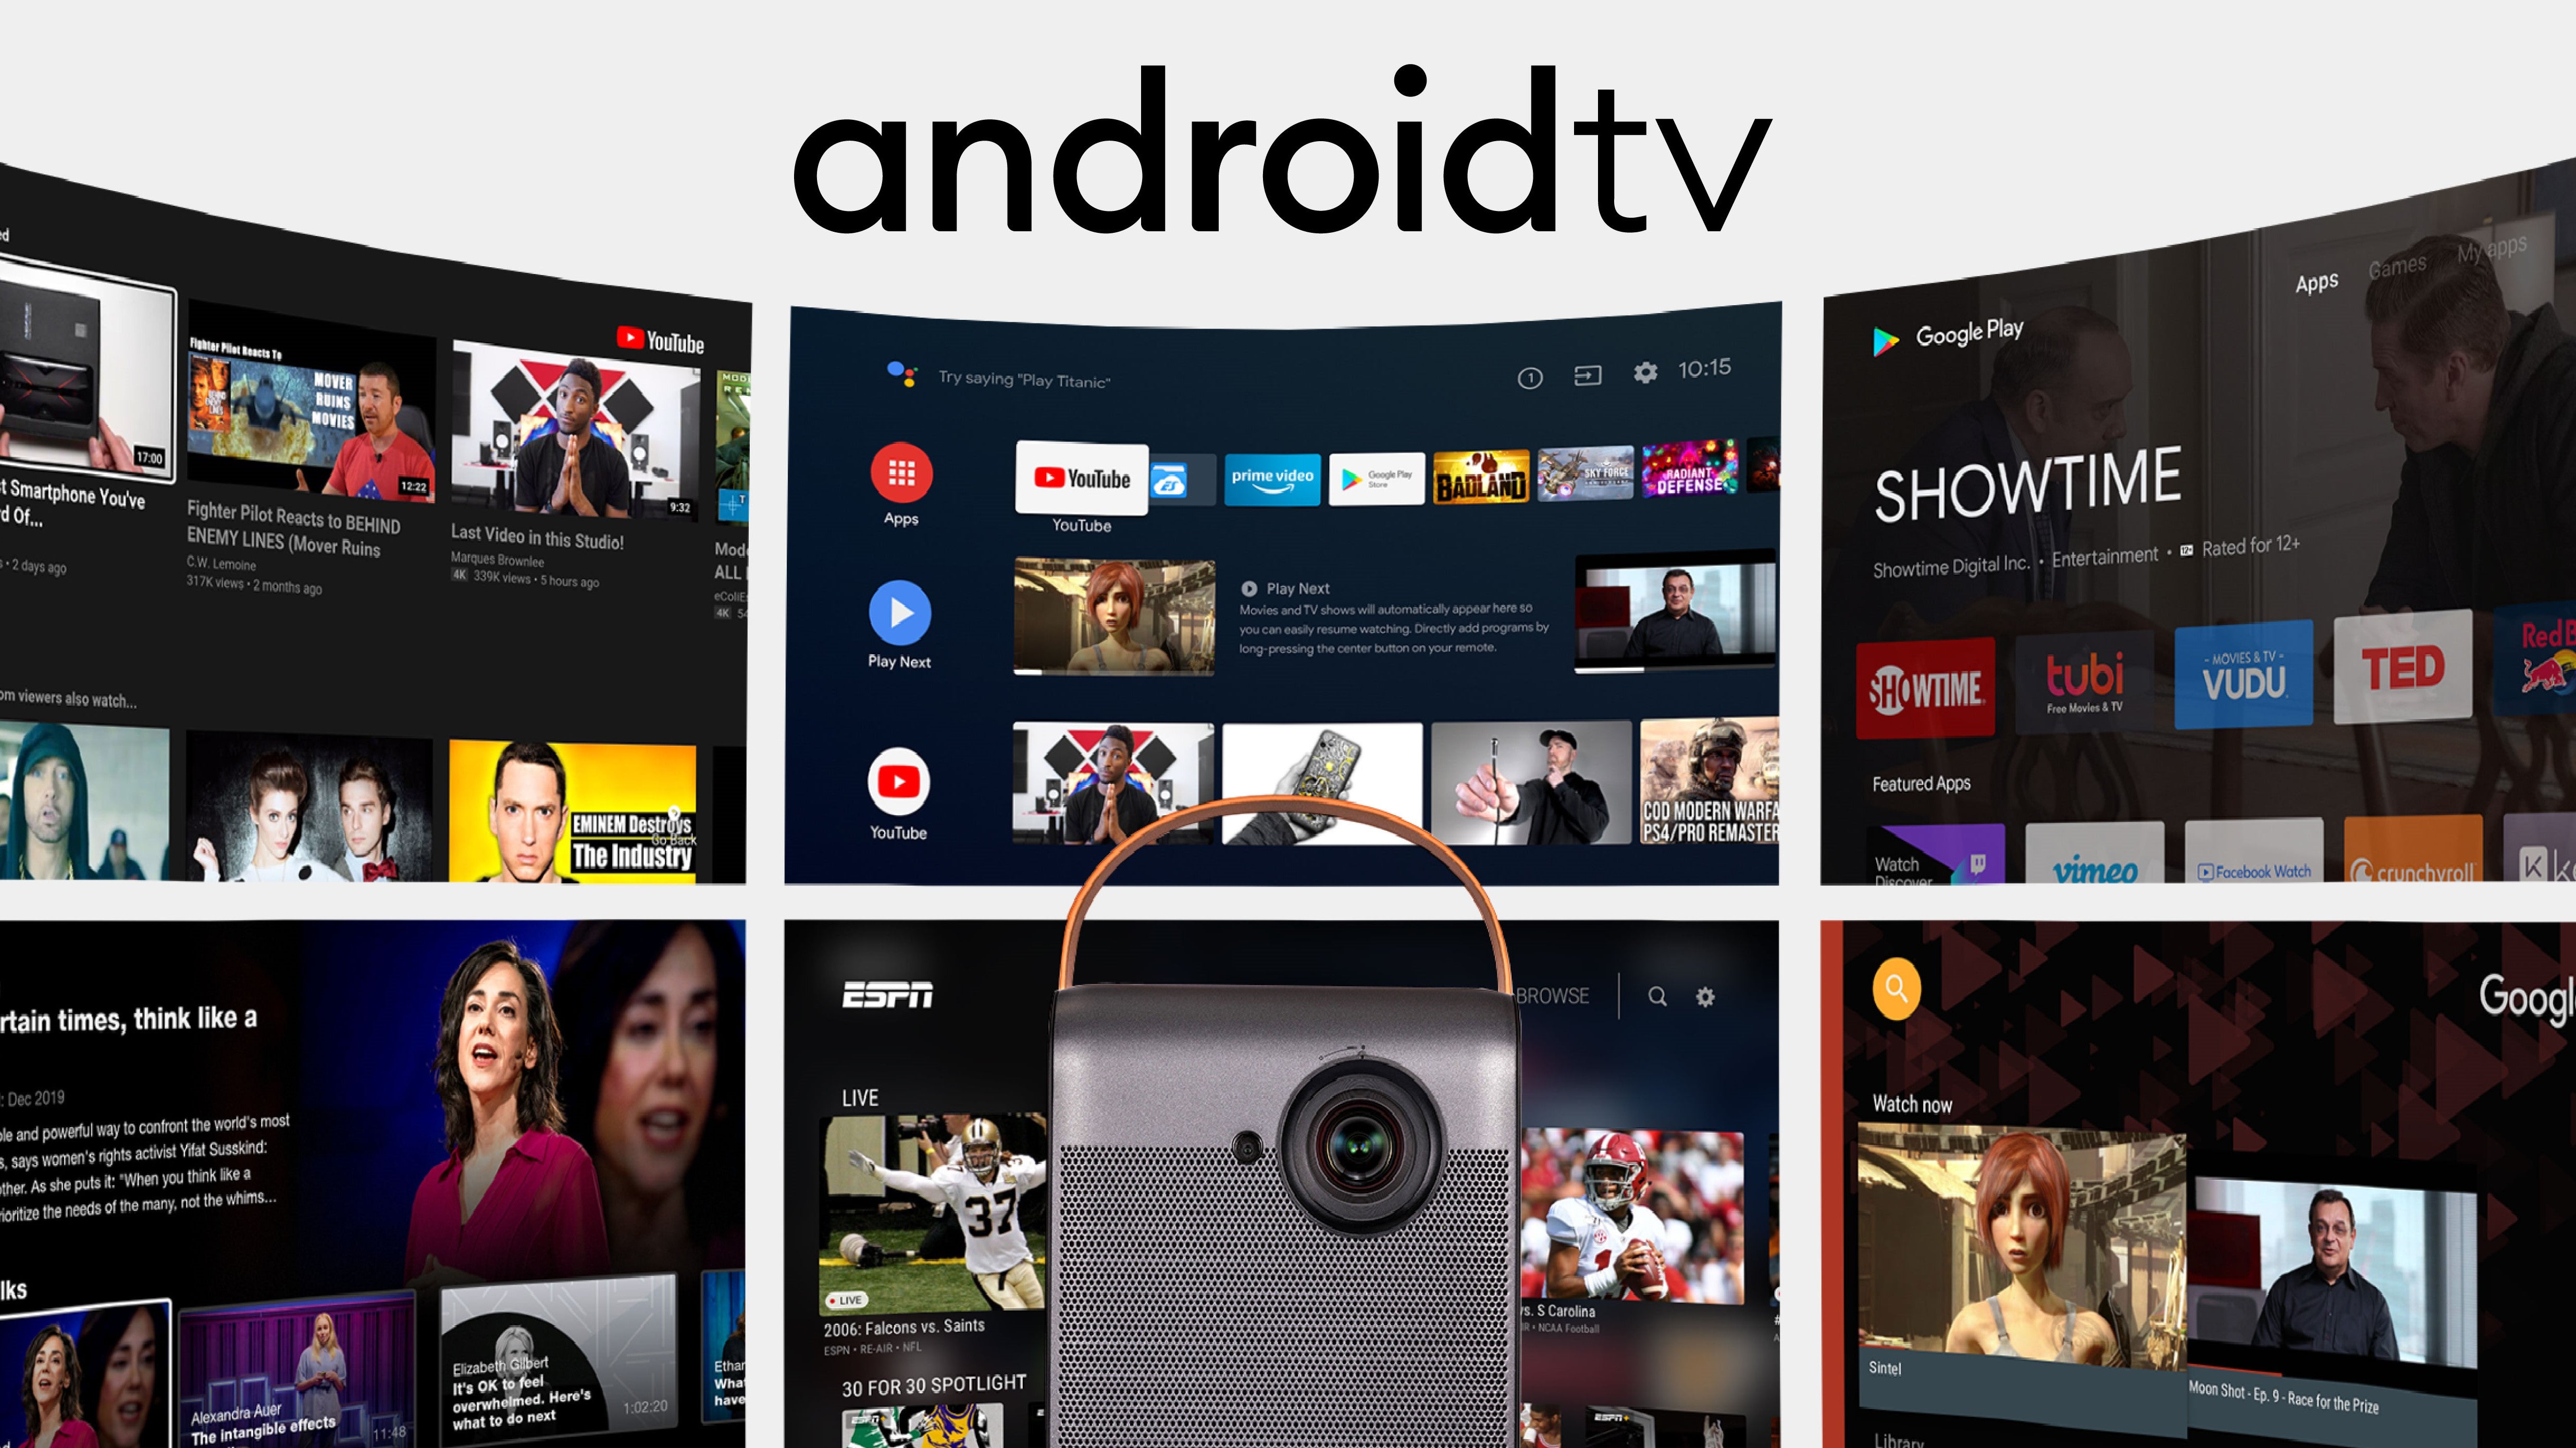 Prime Video app appears in the Google Play Store for Android TV